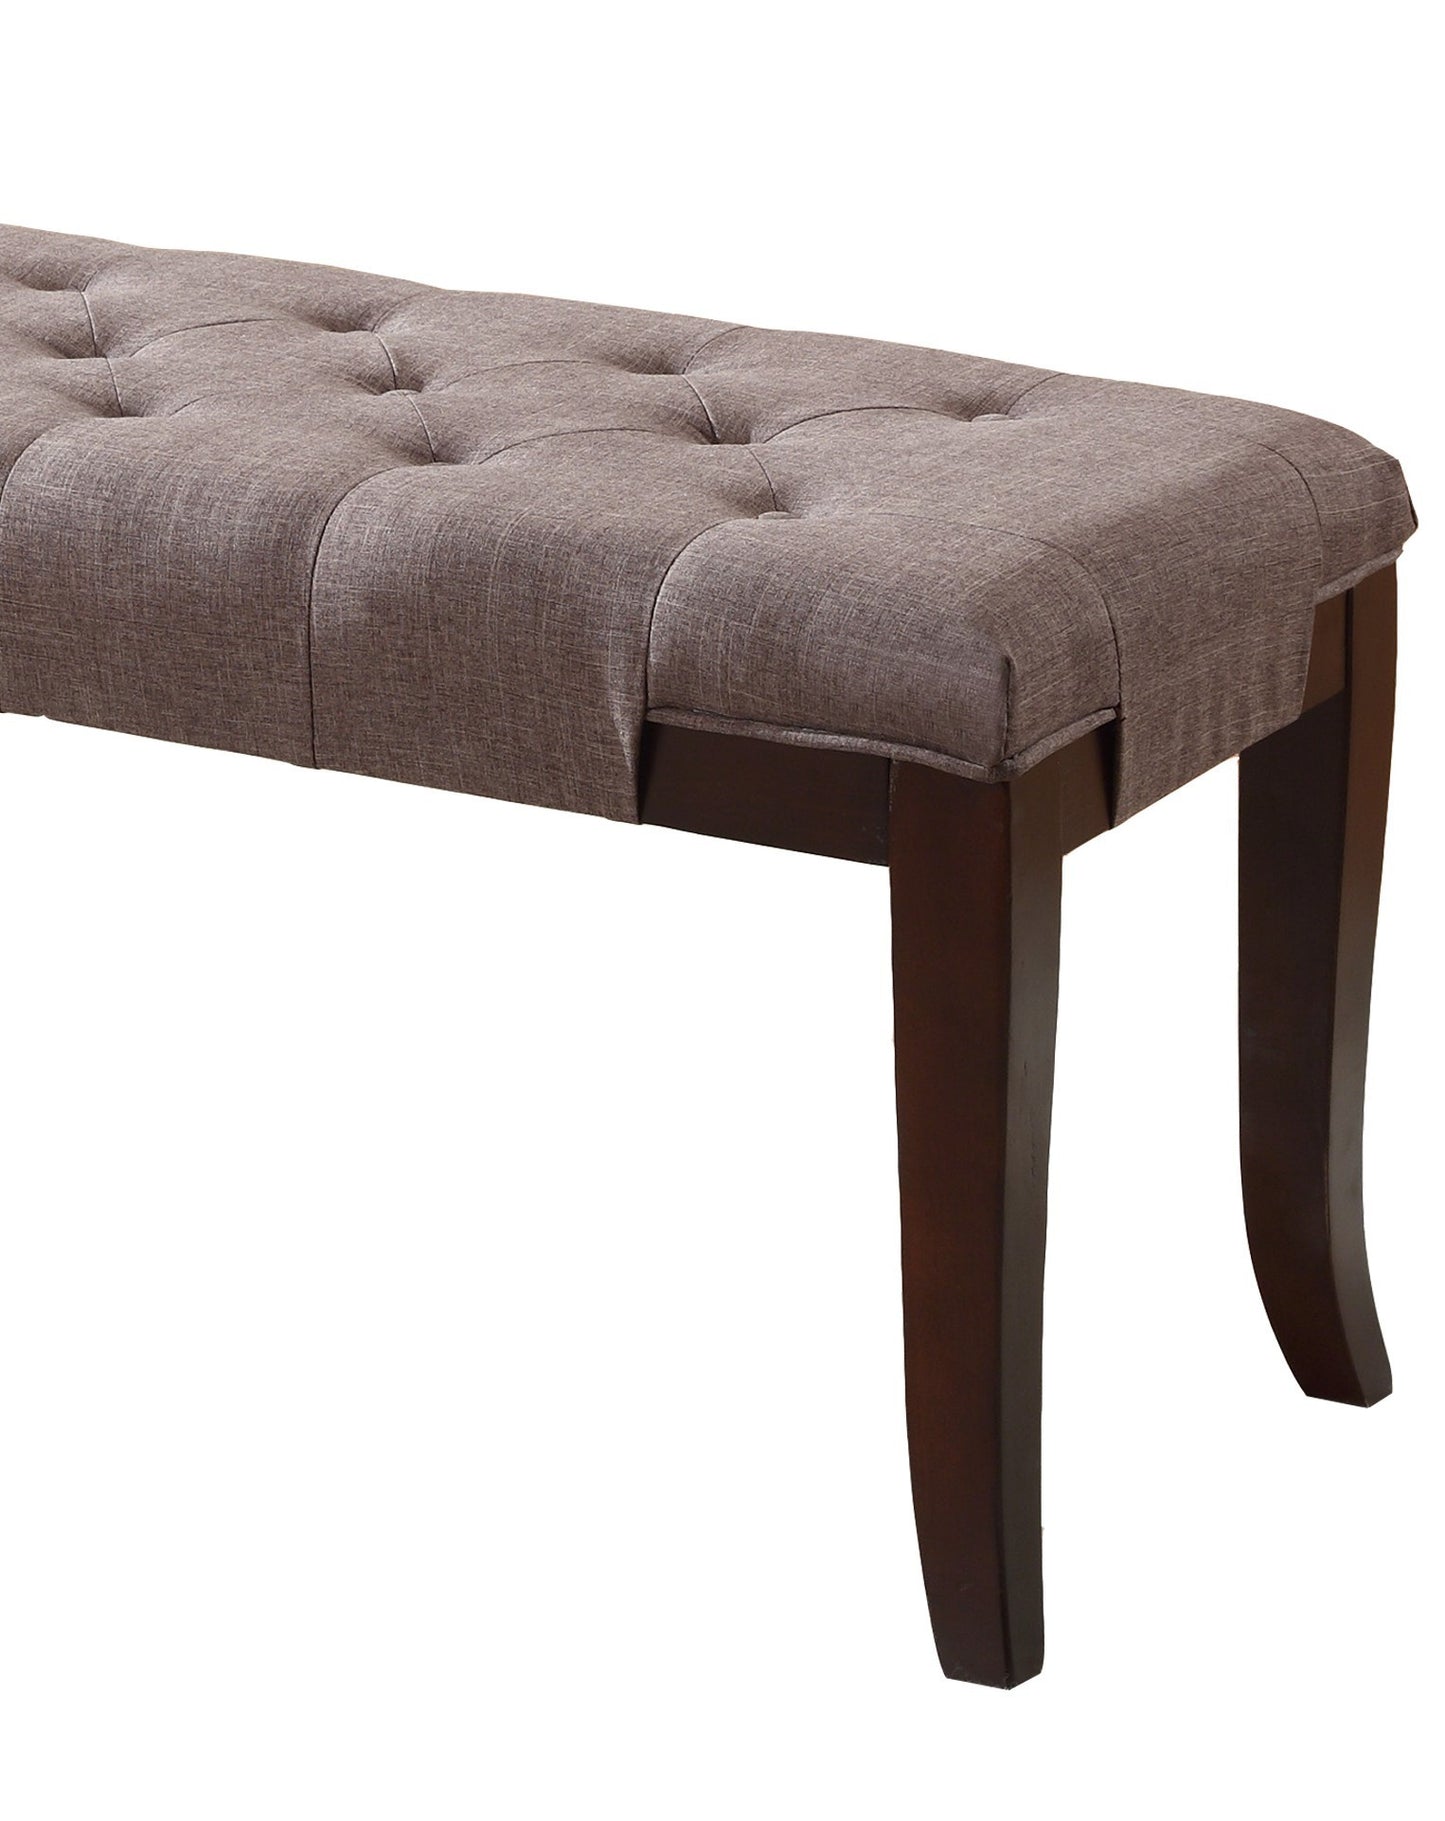 Linon Tufted Bench, Fabric, Brown